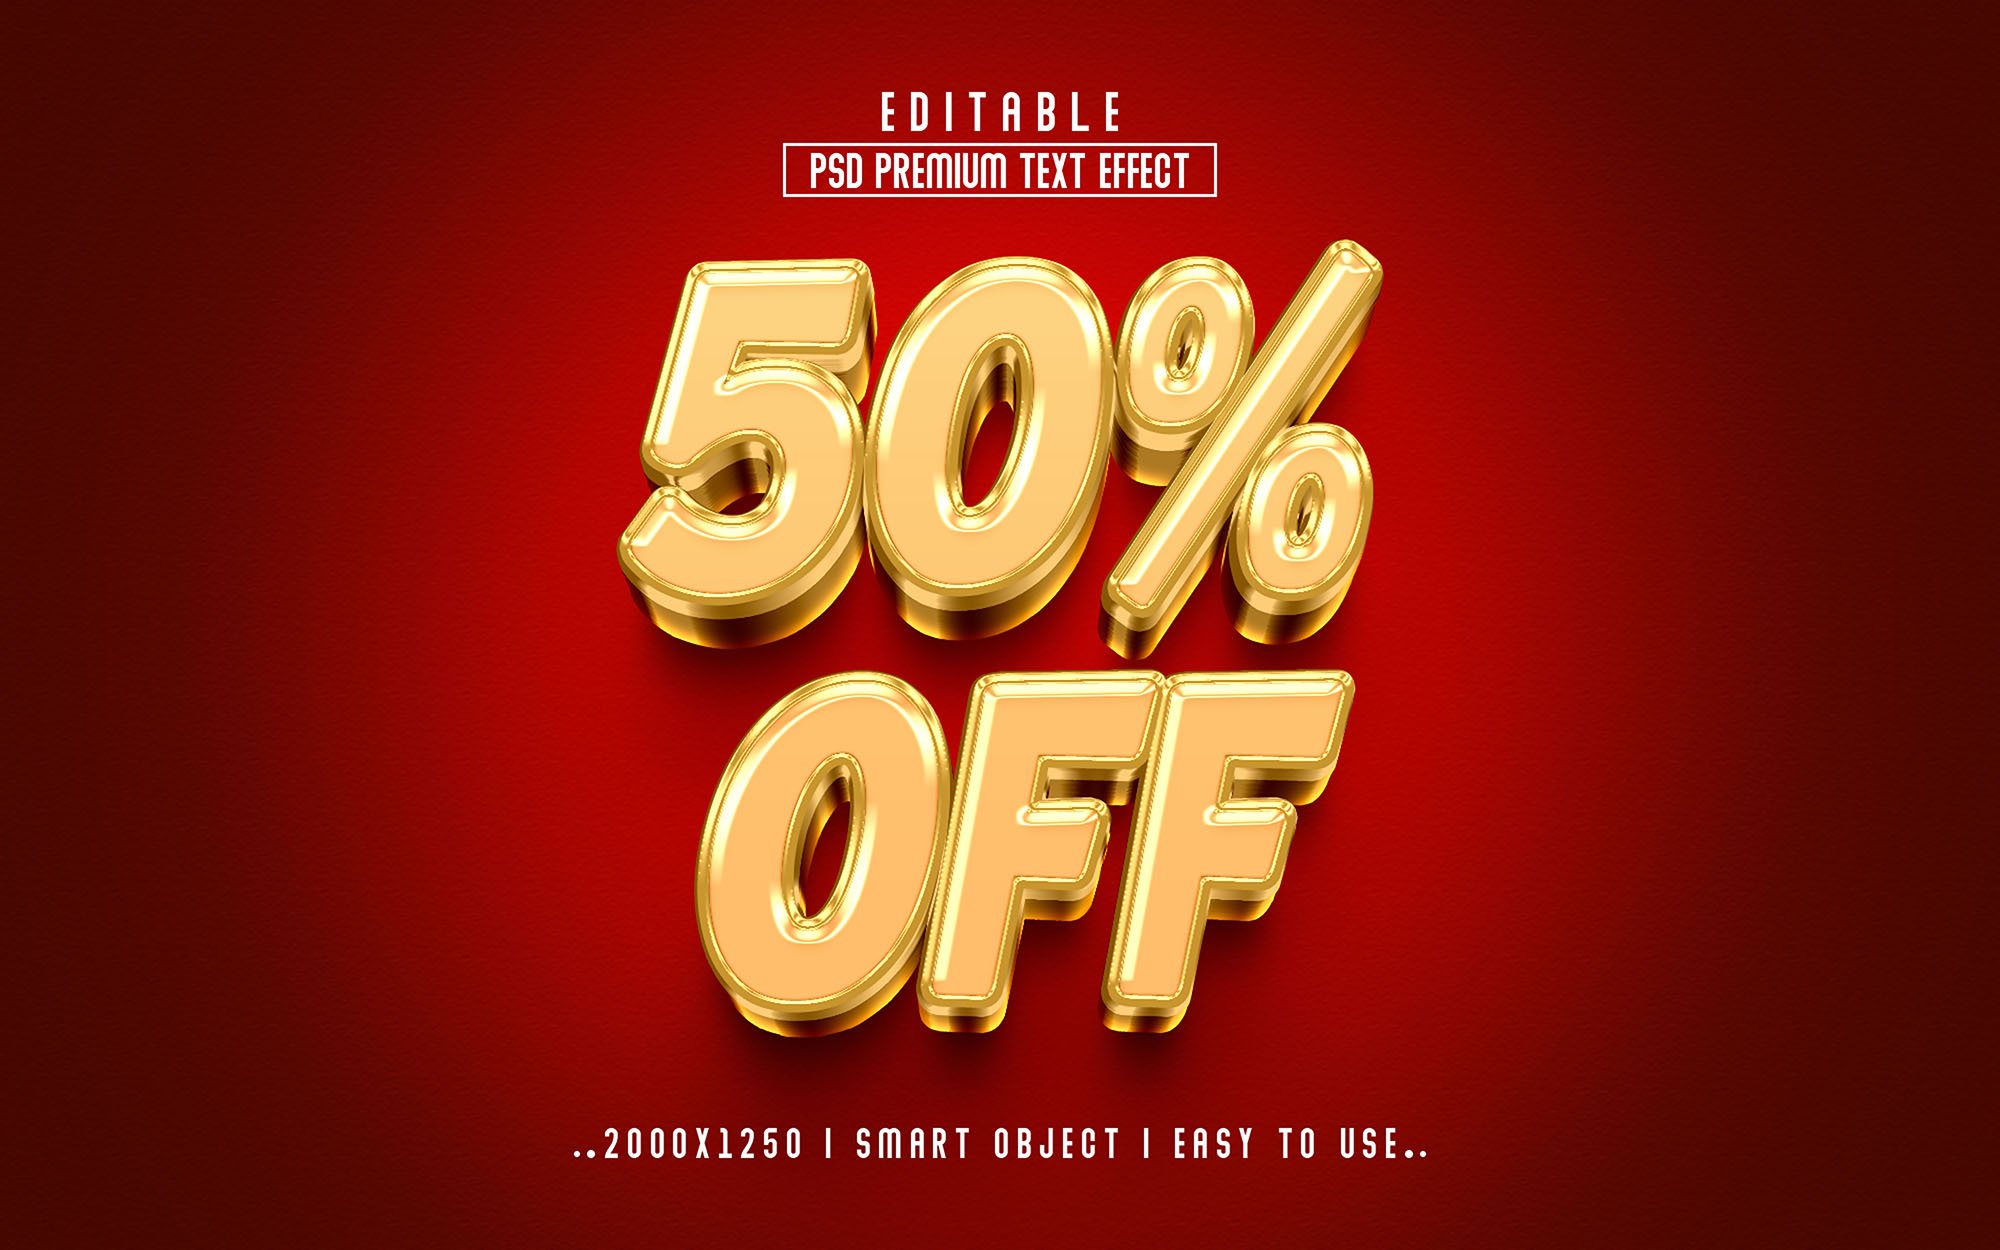 Red background with gold text that says 50 % off.